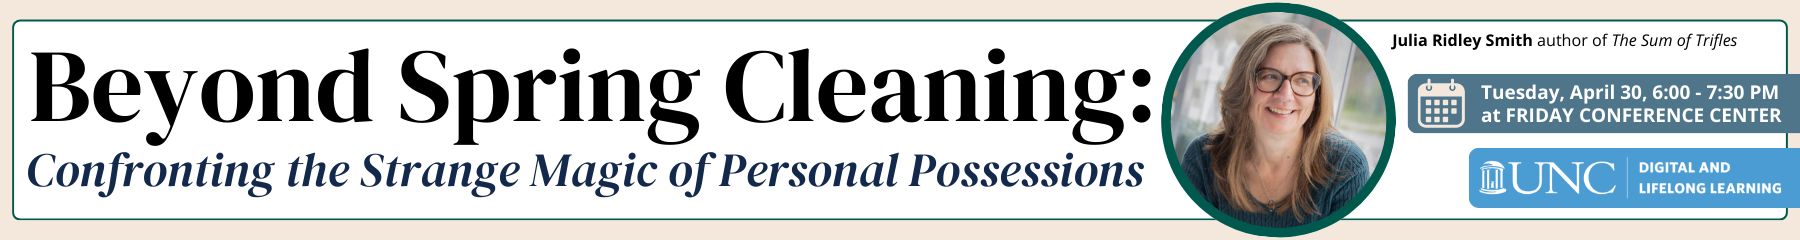 DLL's Spring Program "Beyond Spring Cleaning: Confronting the Strange Magic of Personal Possessions," will be held on April 30, 2024 from 6:00 to 7:30 PM at the Friday Conference Center.